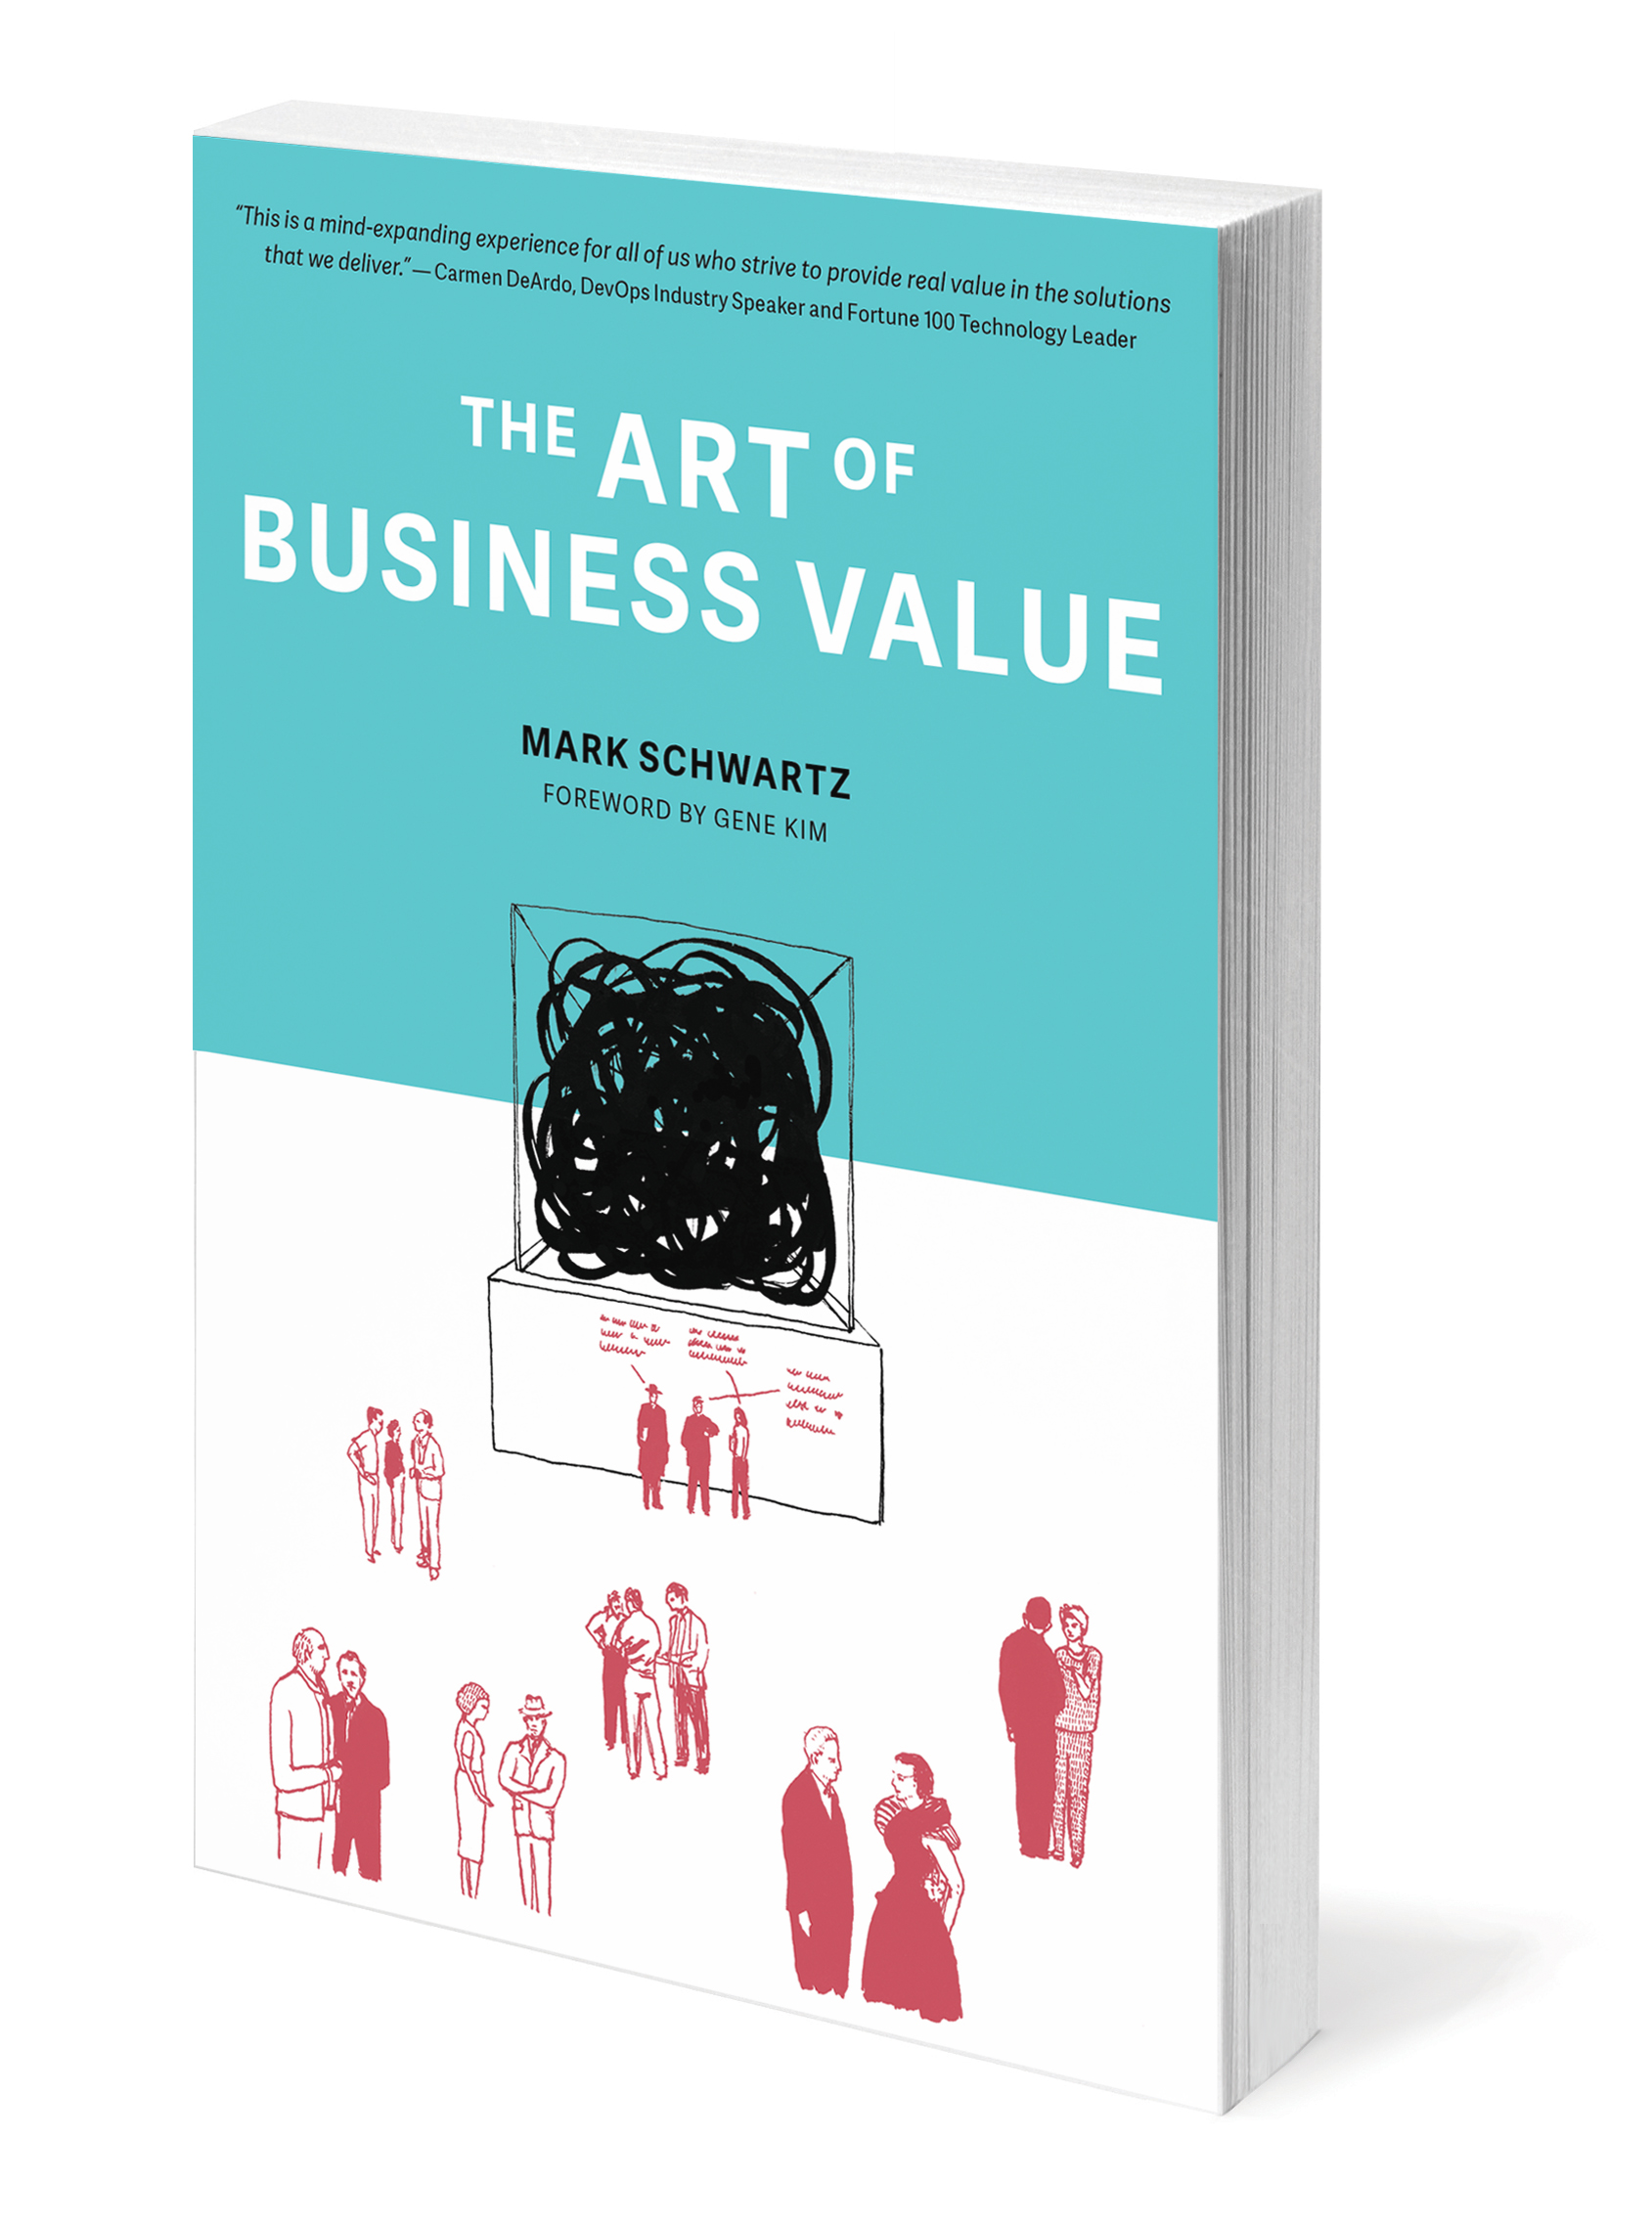 The Art of Business Value